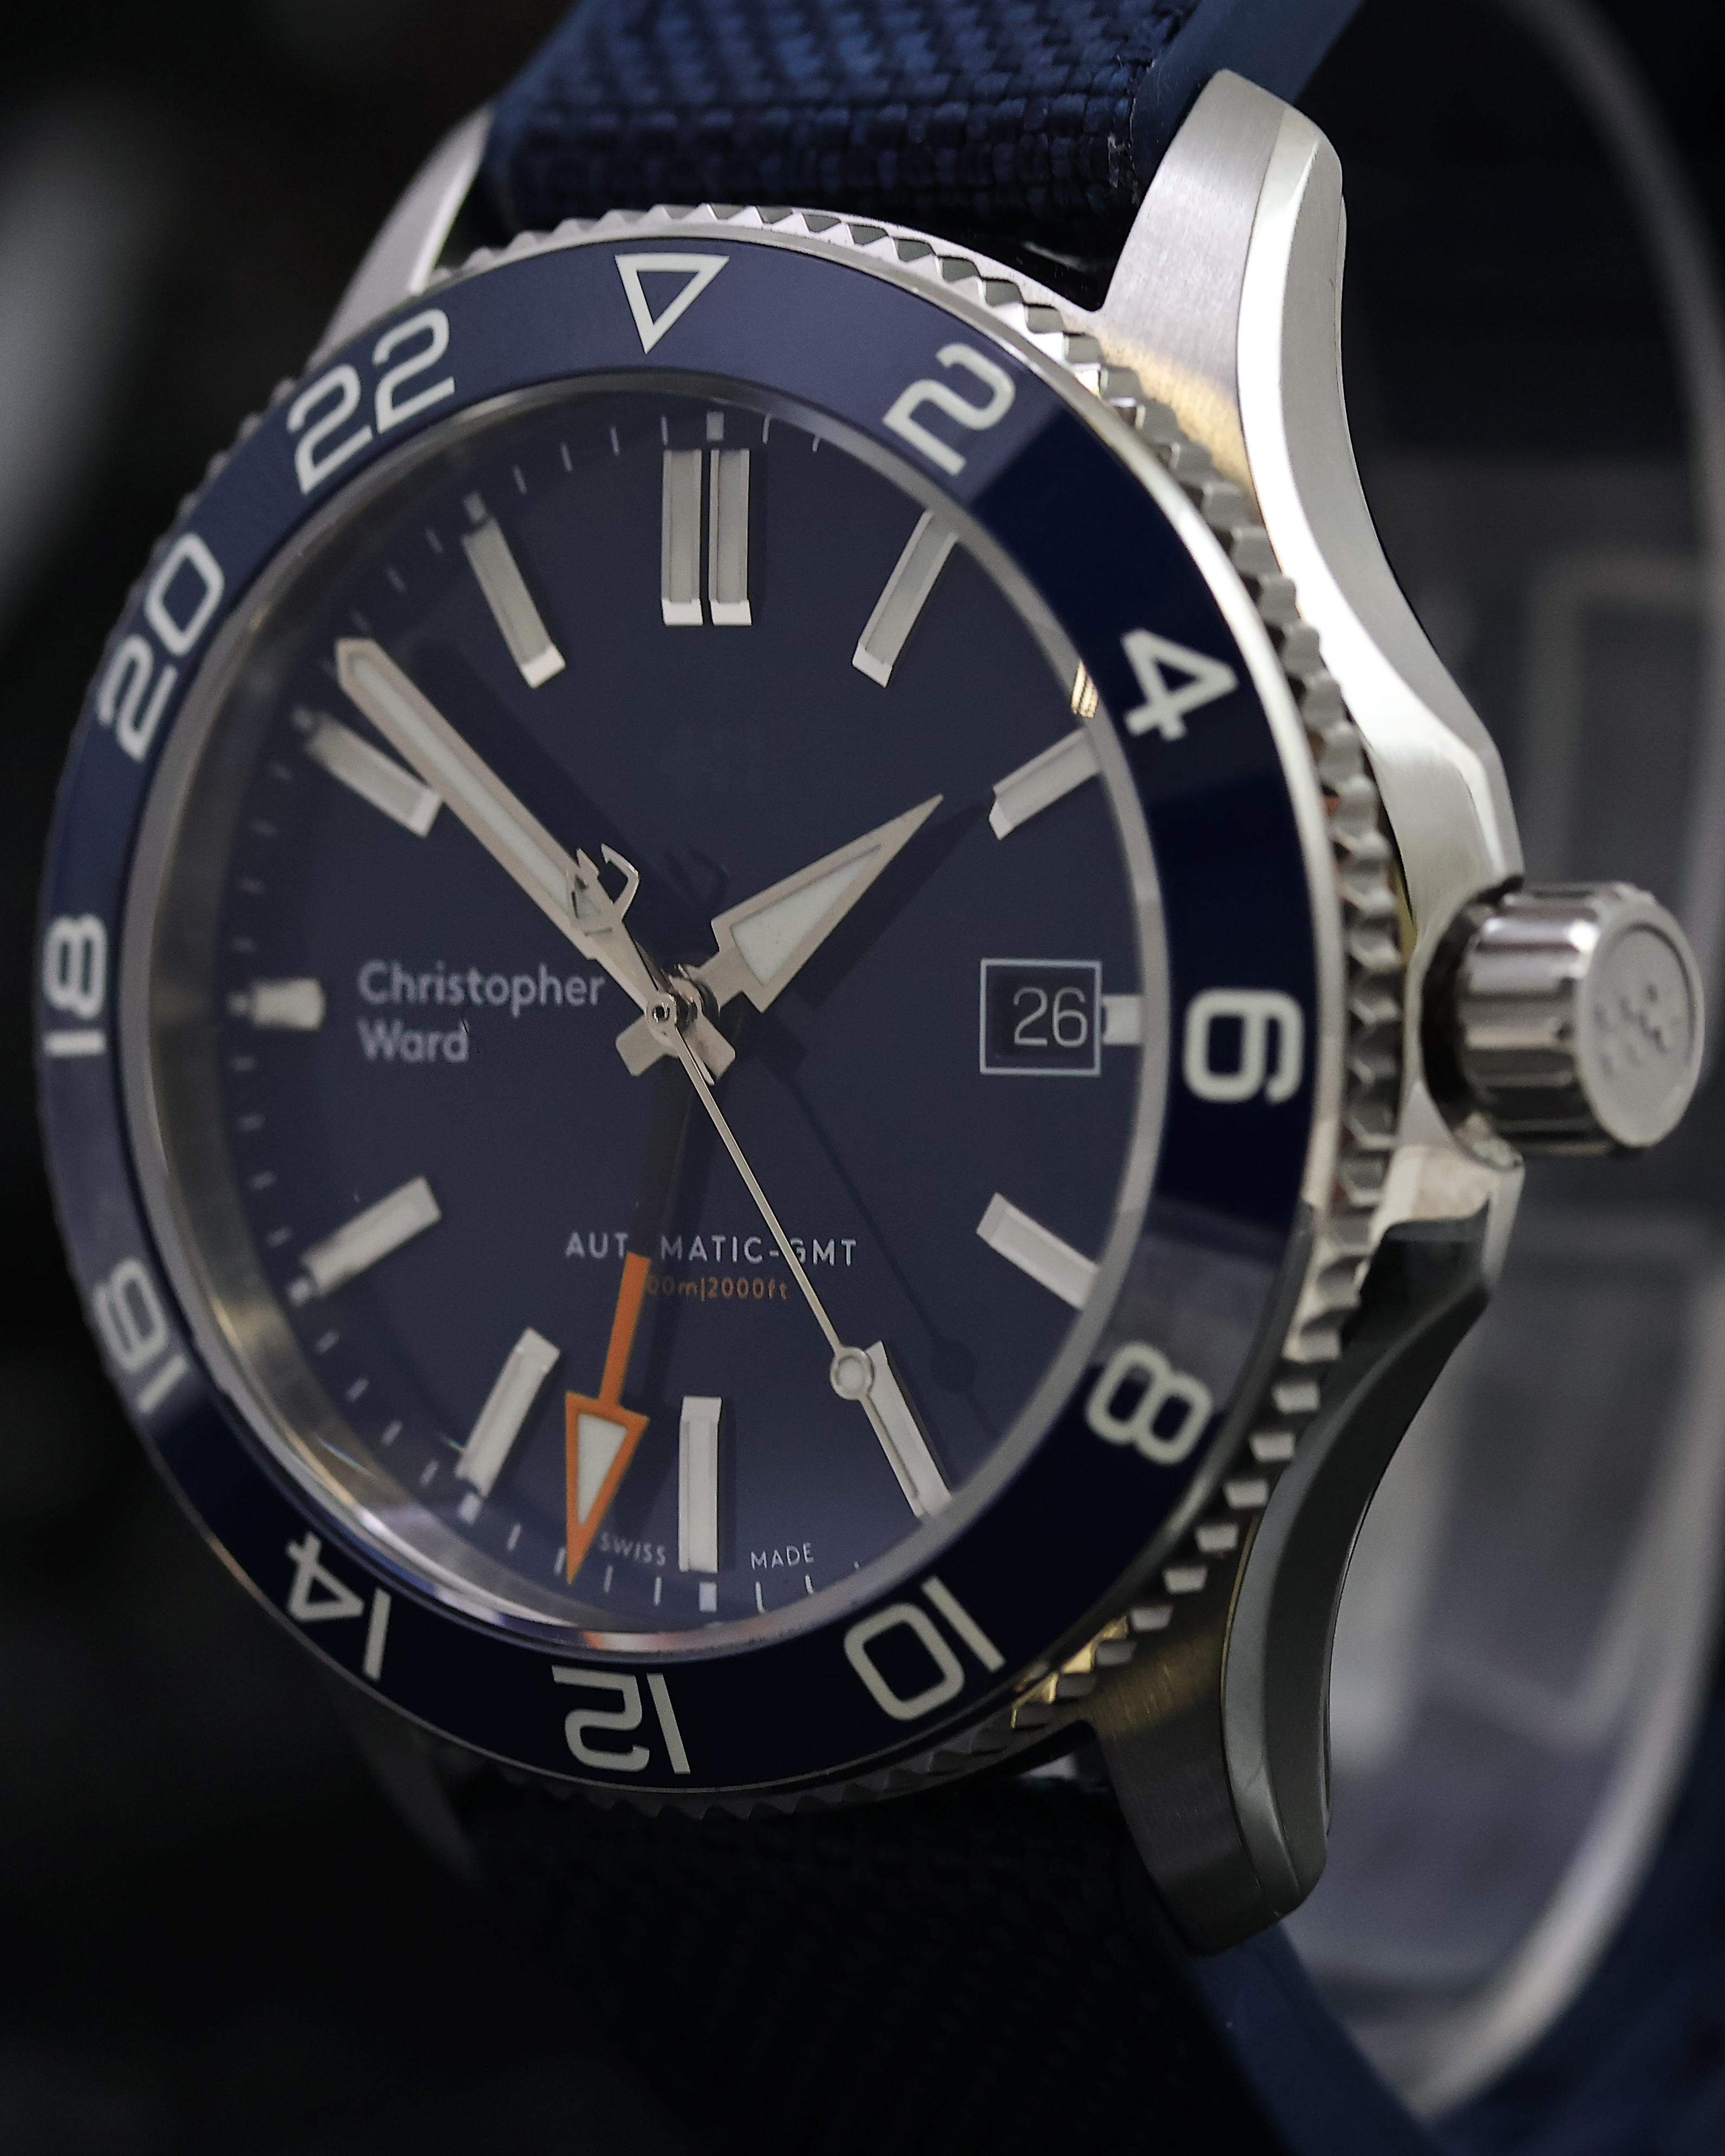 CHRISTOPHER WARD C60 GMT BOX AND PAPERS 2019 - Image 4 of 4